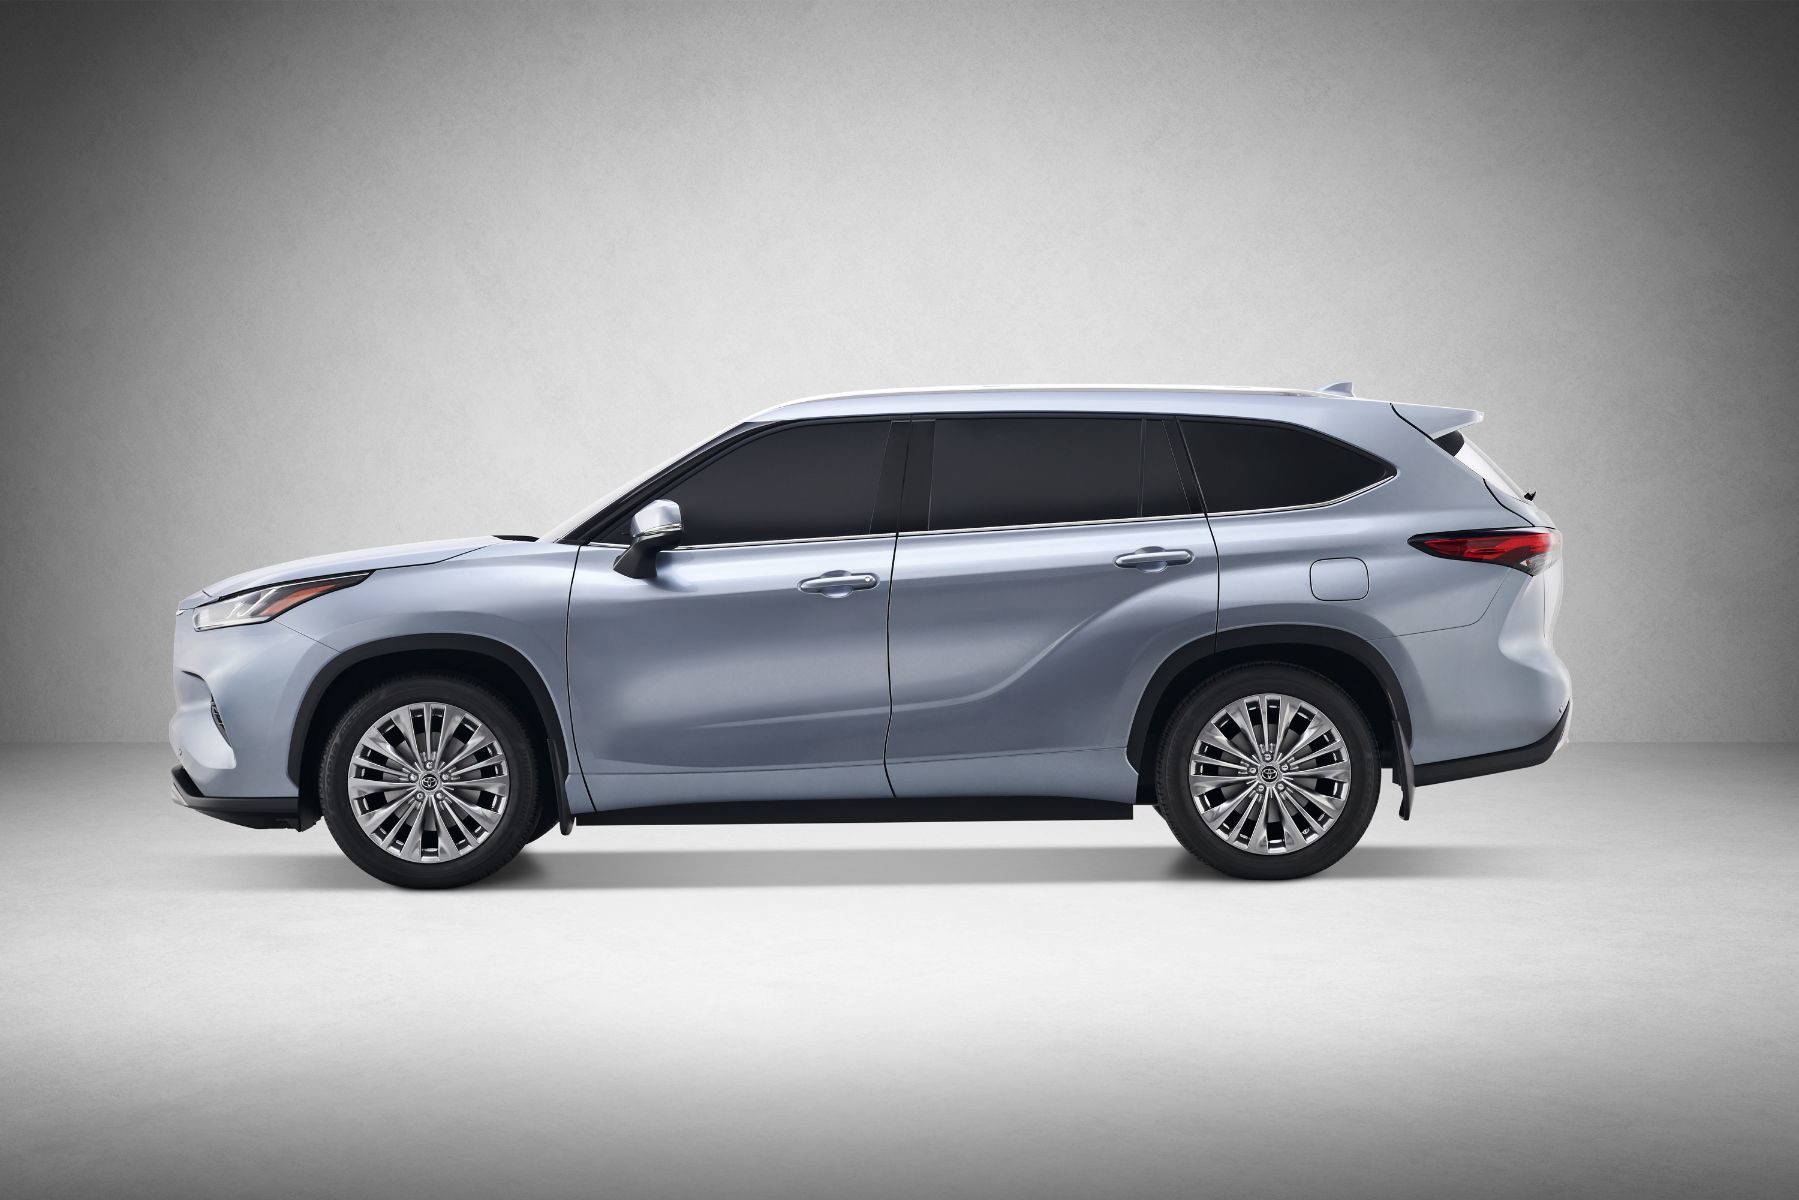 The new 2020 Toyota Highlander and its upcoming hybrid version